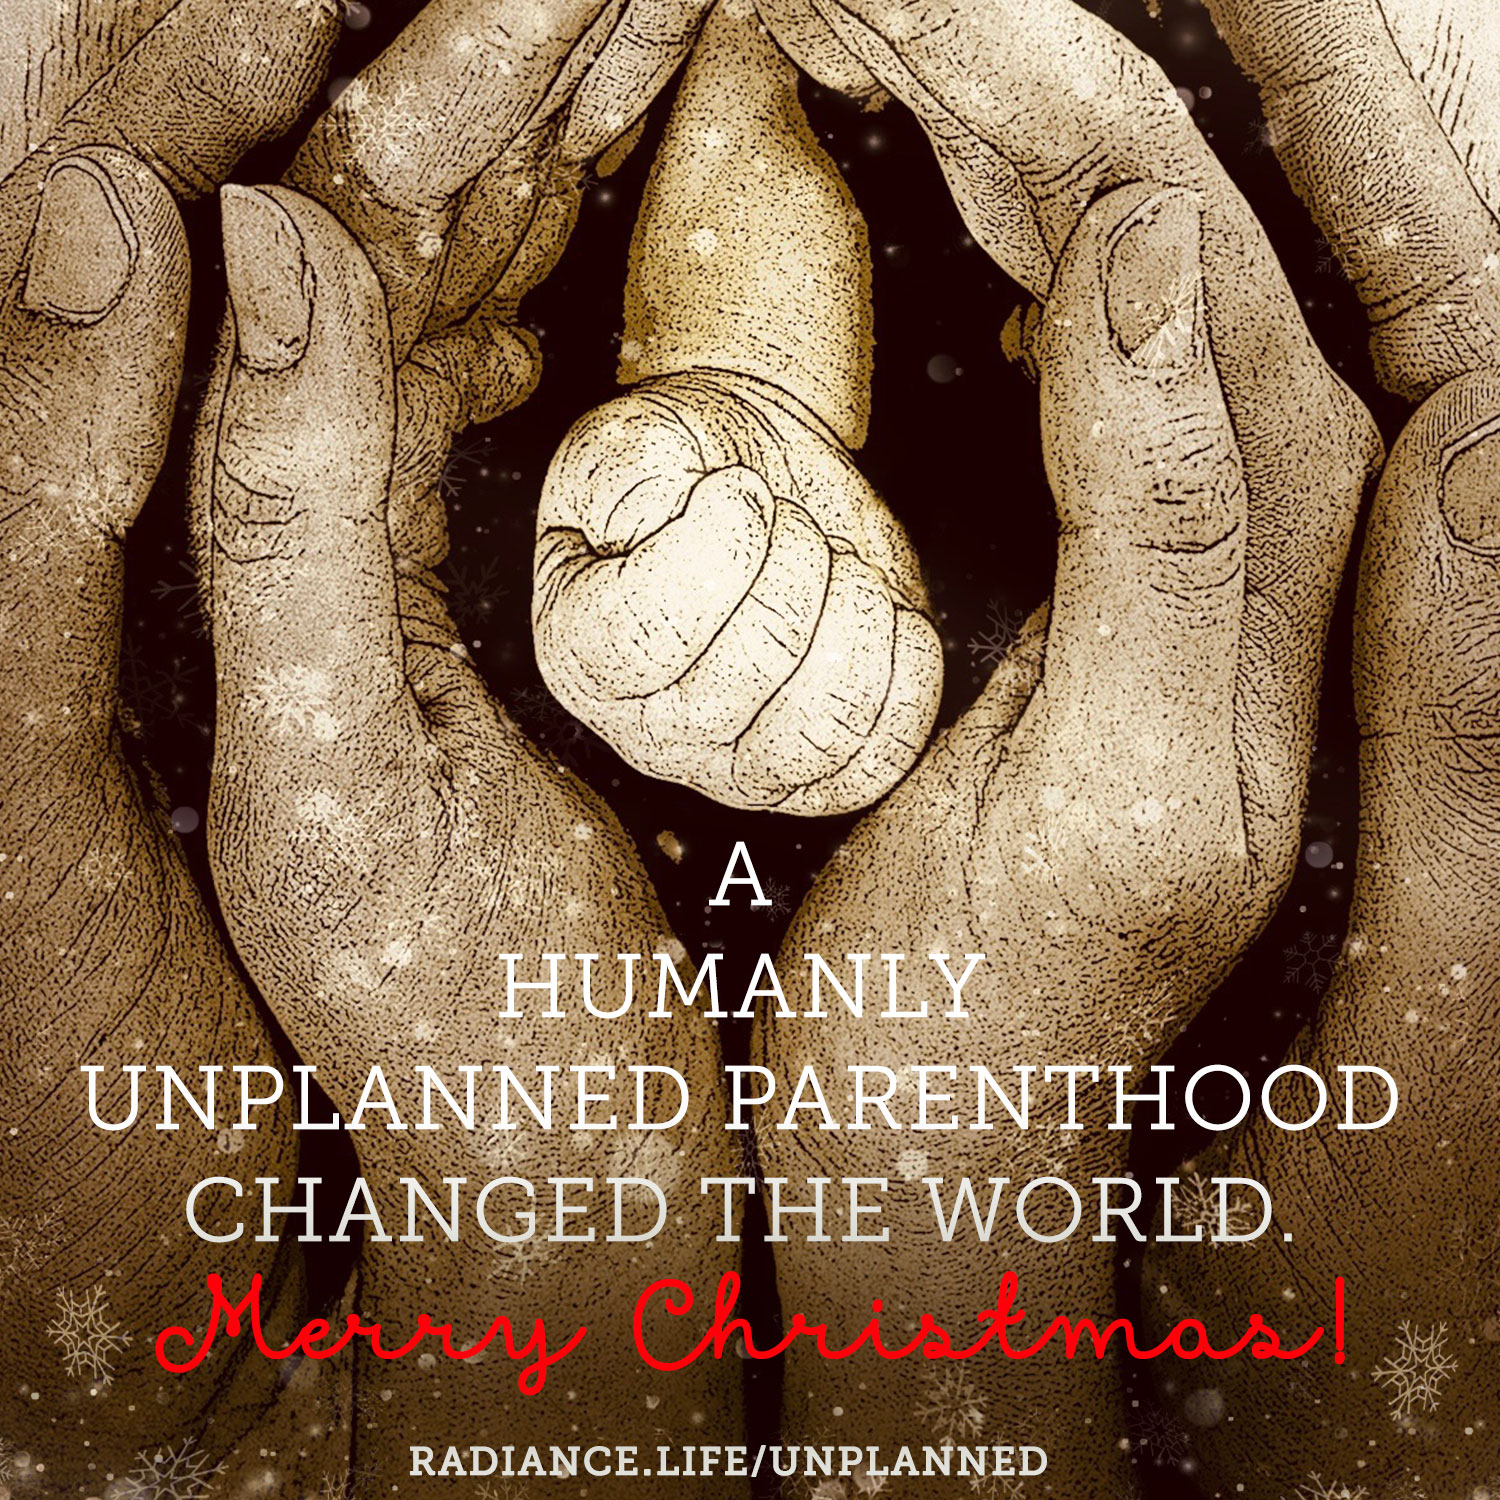 "Humanly Unplanned Parenthood" by The Radiance Foundation